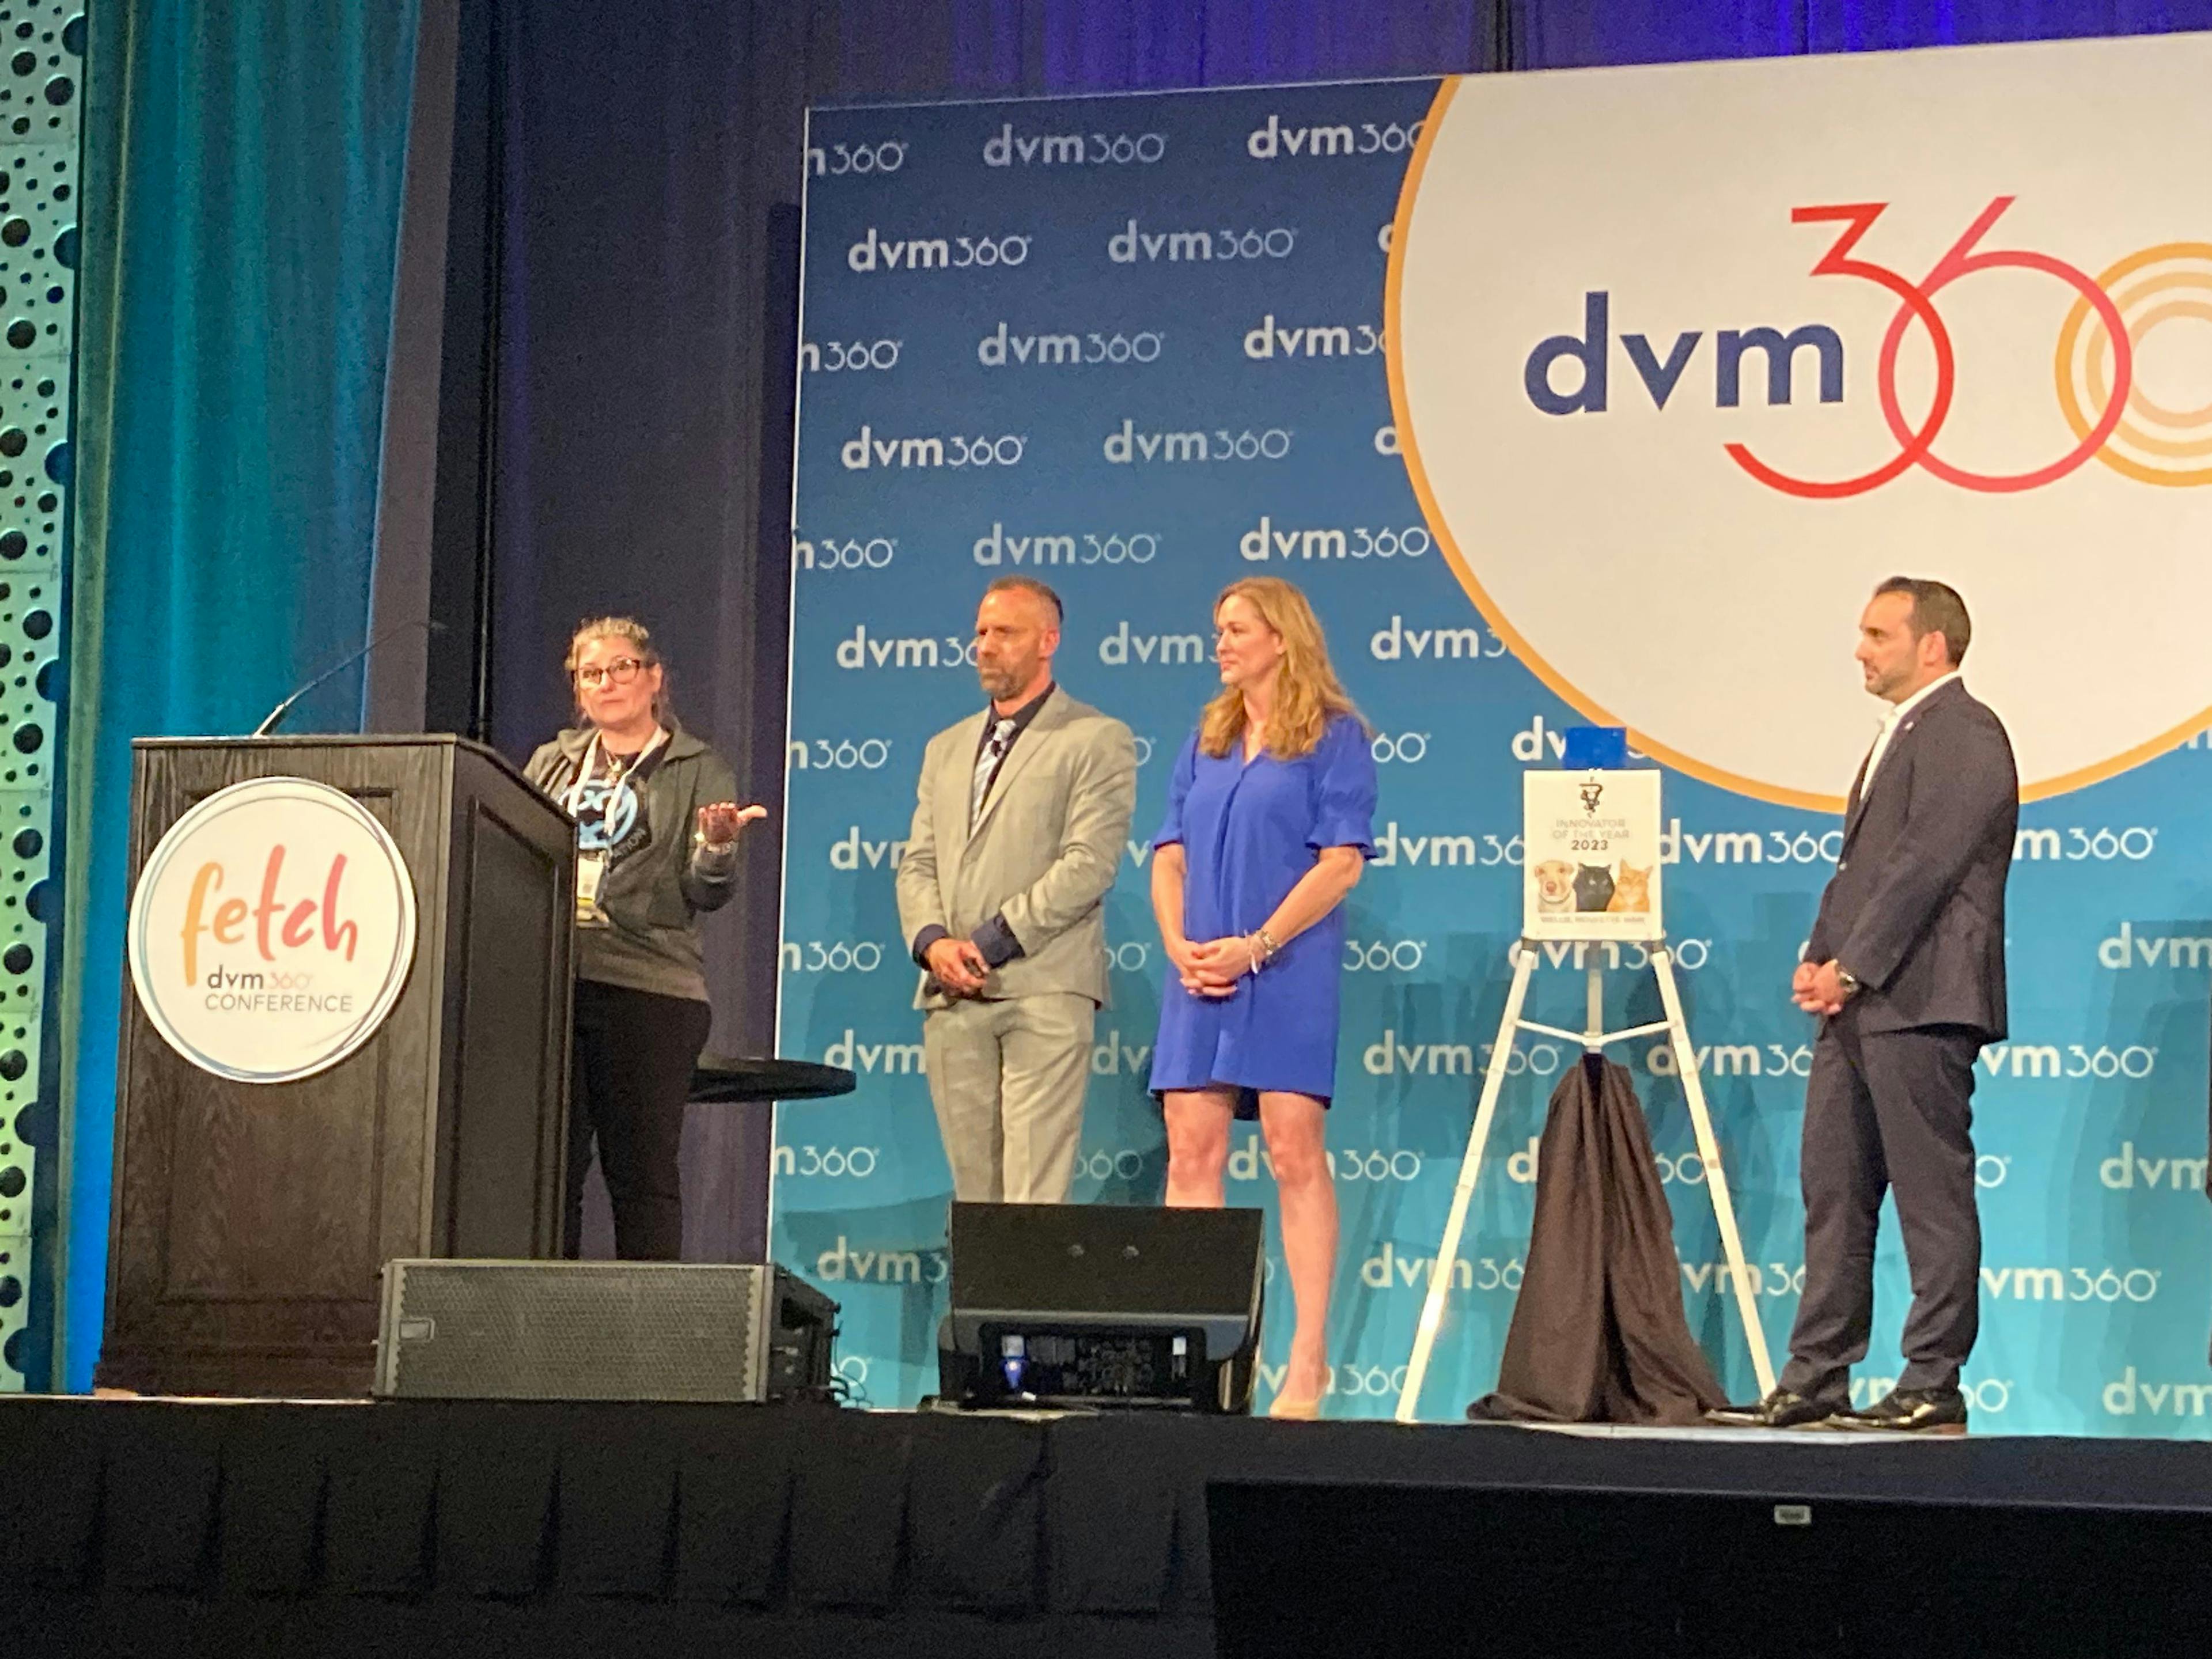 Photo: Kristen Coppock, MA

Ellen Carozza, LVT, VTS(CP-Feline), (left) an Innovator of the Year Award winner for 2023 addresses the audience during the 2023 Fetch dvm360 conference in Long Beach, California, while Adam Christman, DVM, MBA, Katy Nelson, DVM, associate director of veterinary relations for Chewy Health, and John Hydrusko, vice president of Sales for dvm360 and MJH Life Sciences, (from left to right) look on and listen.